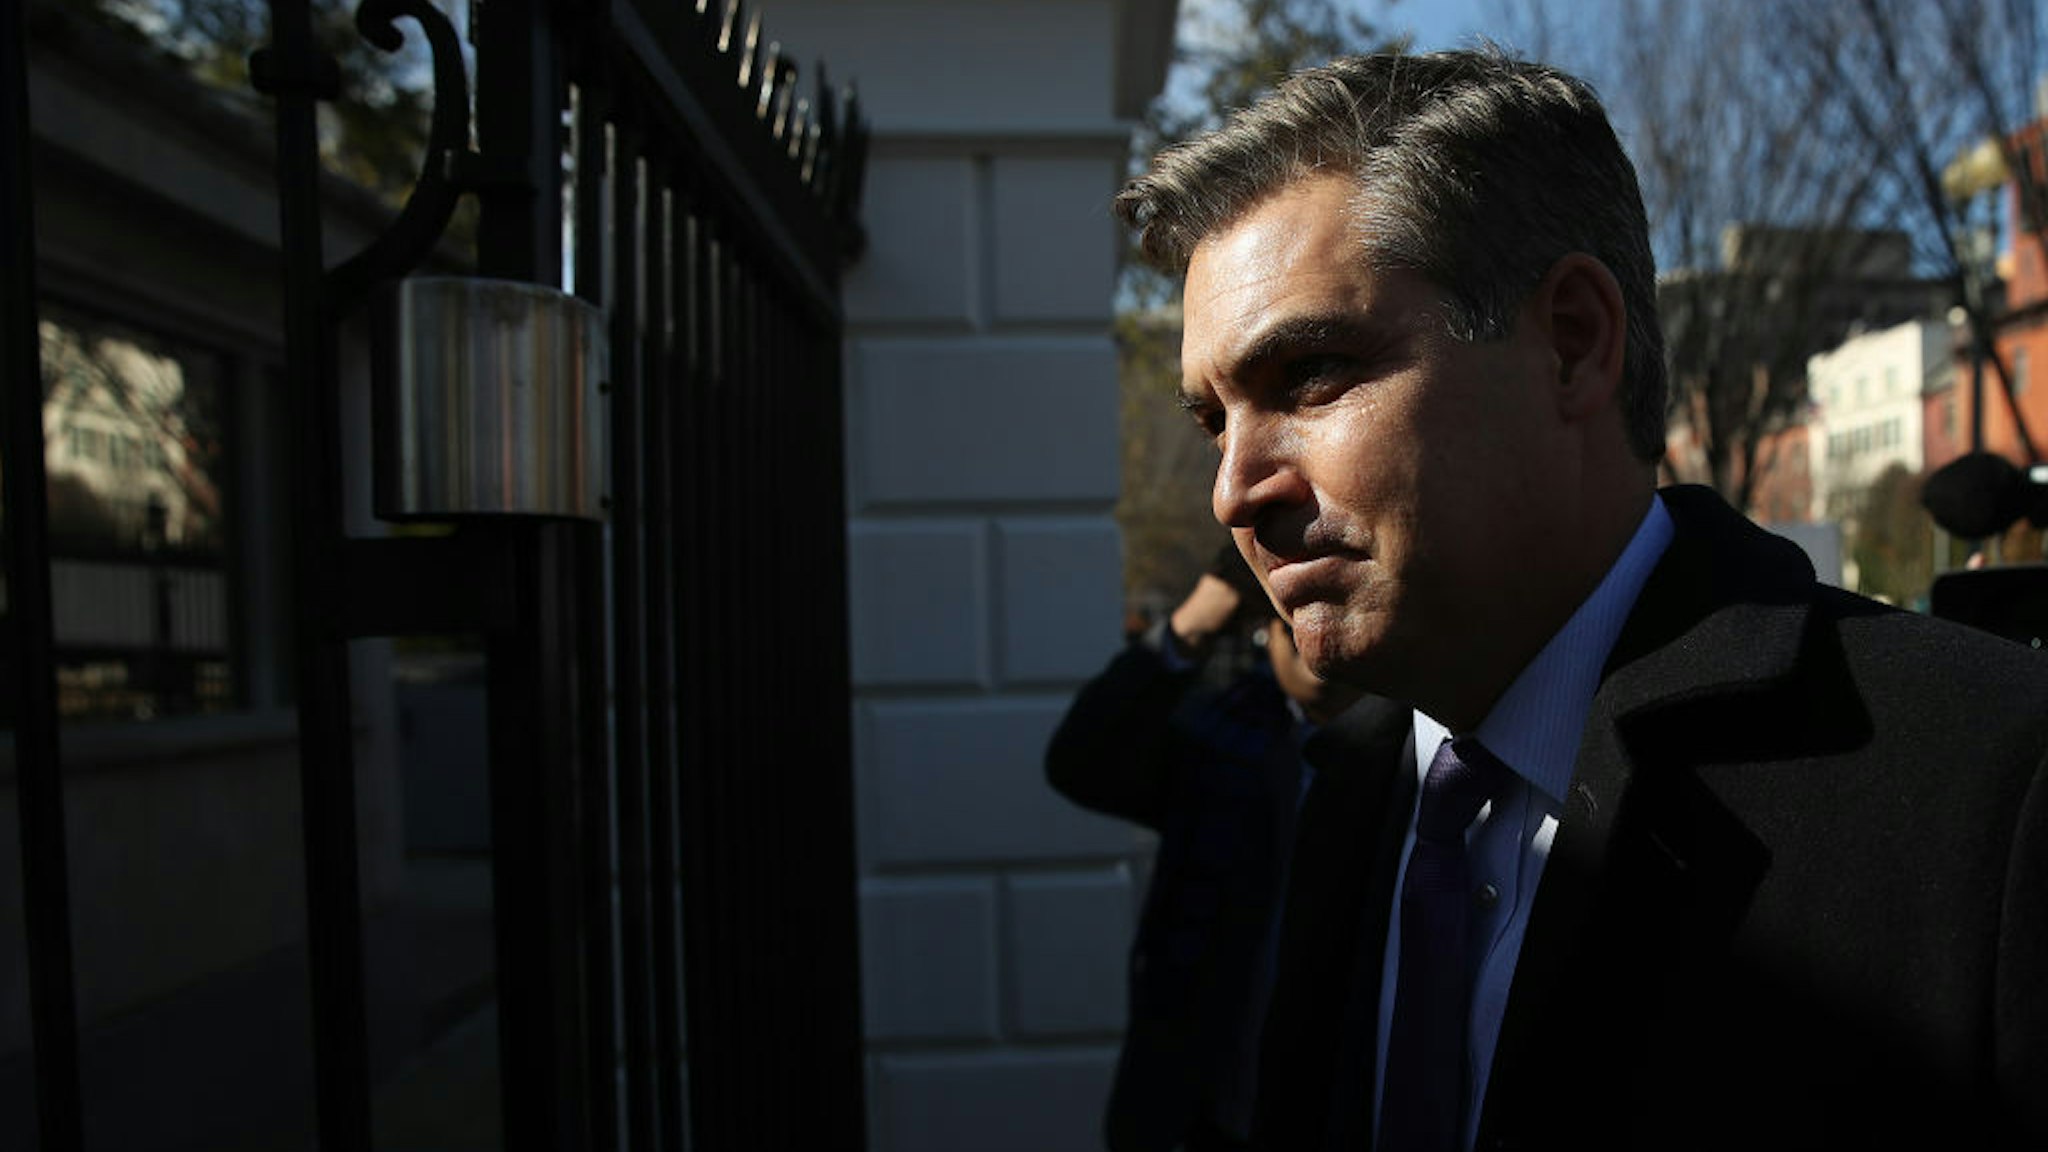 CNN White House correspondent Jim Acosta arrives at the White House gate as he returns to work following a court ruling restoring his ability to report from the White House on November 16, 2018 in Washington, DC.